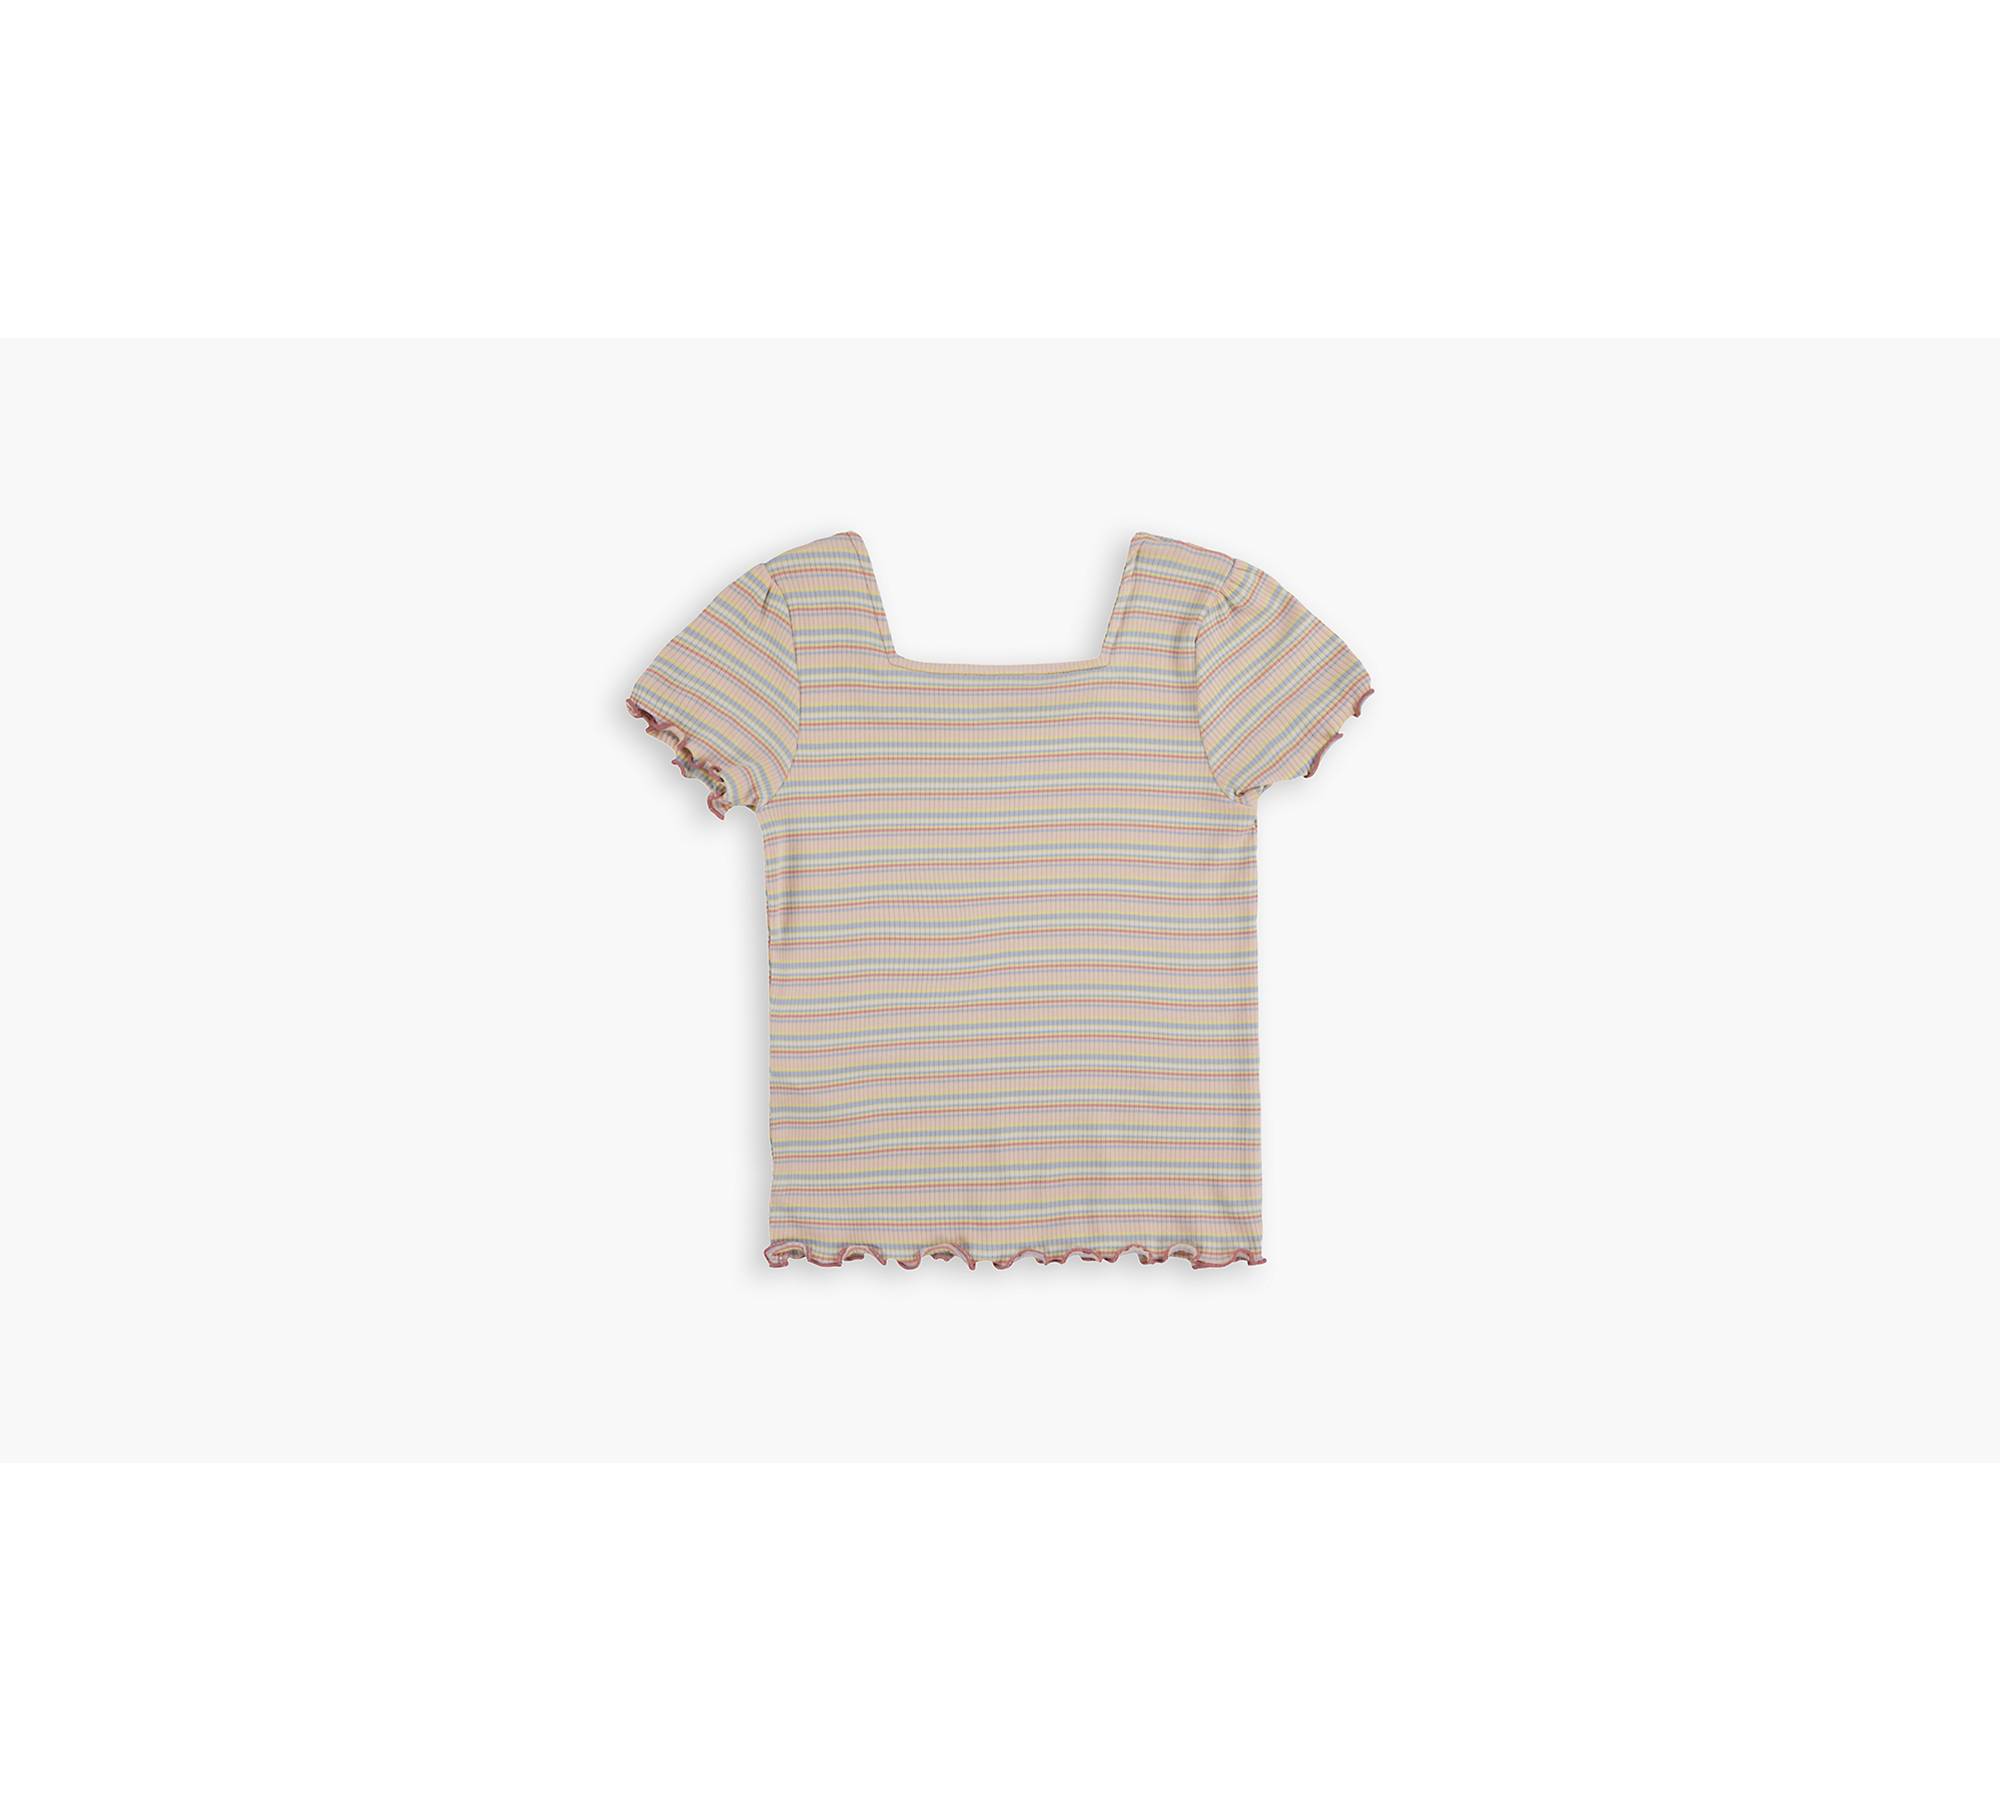 Ribbed Baby T-shirt Big Girls S-xl - Multi-color | Levi's® US